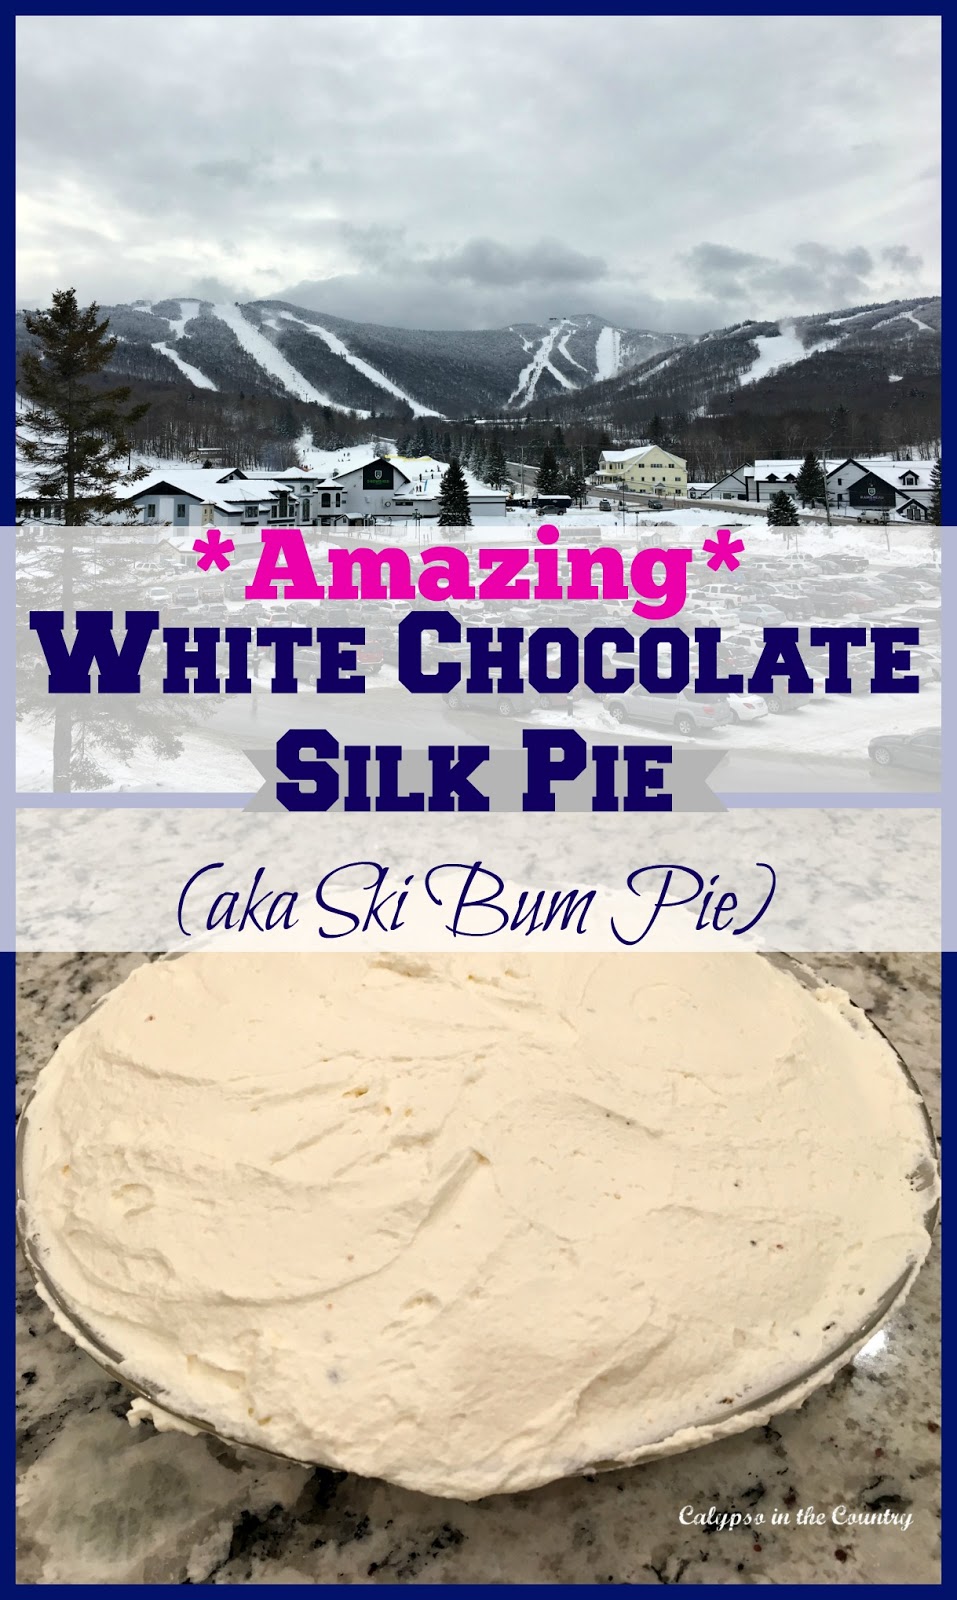 Delicious White Chocolate Silk Pie Recipe with a funny story to go with it!